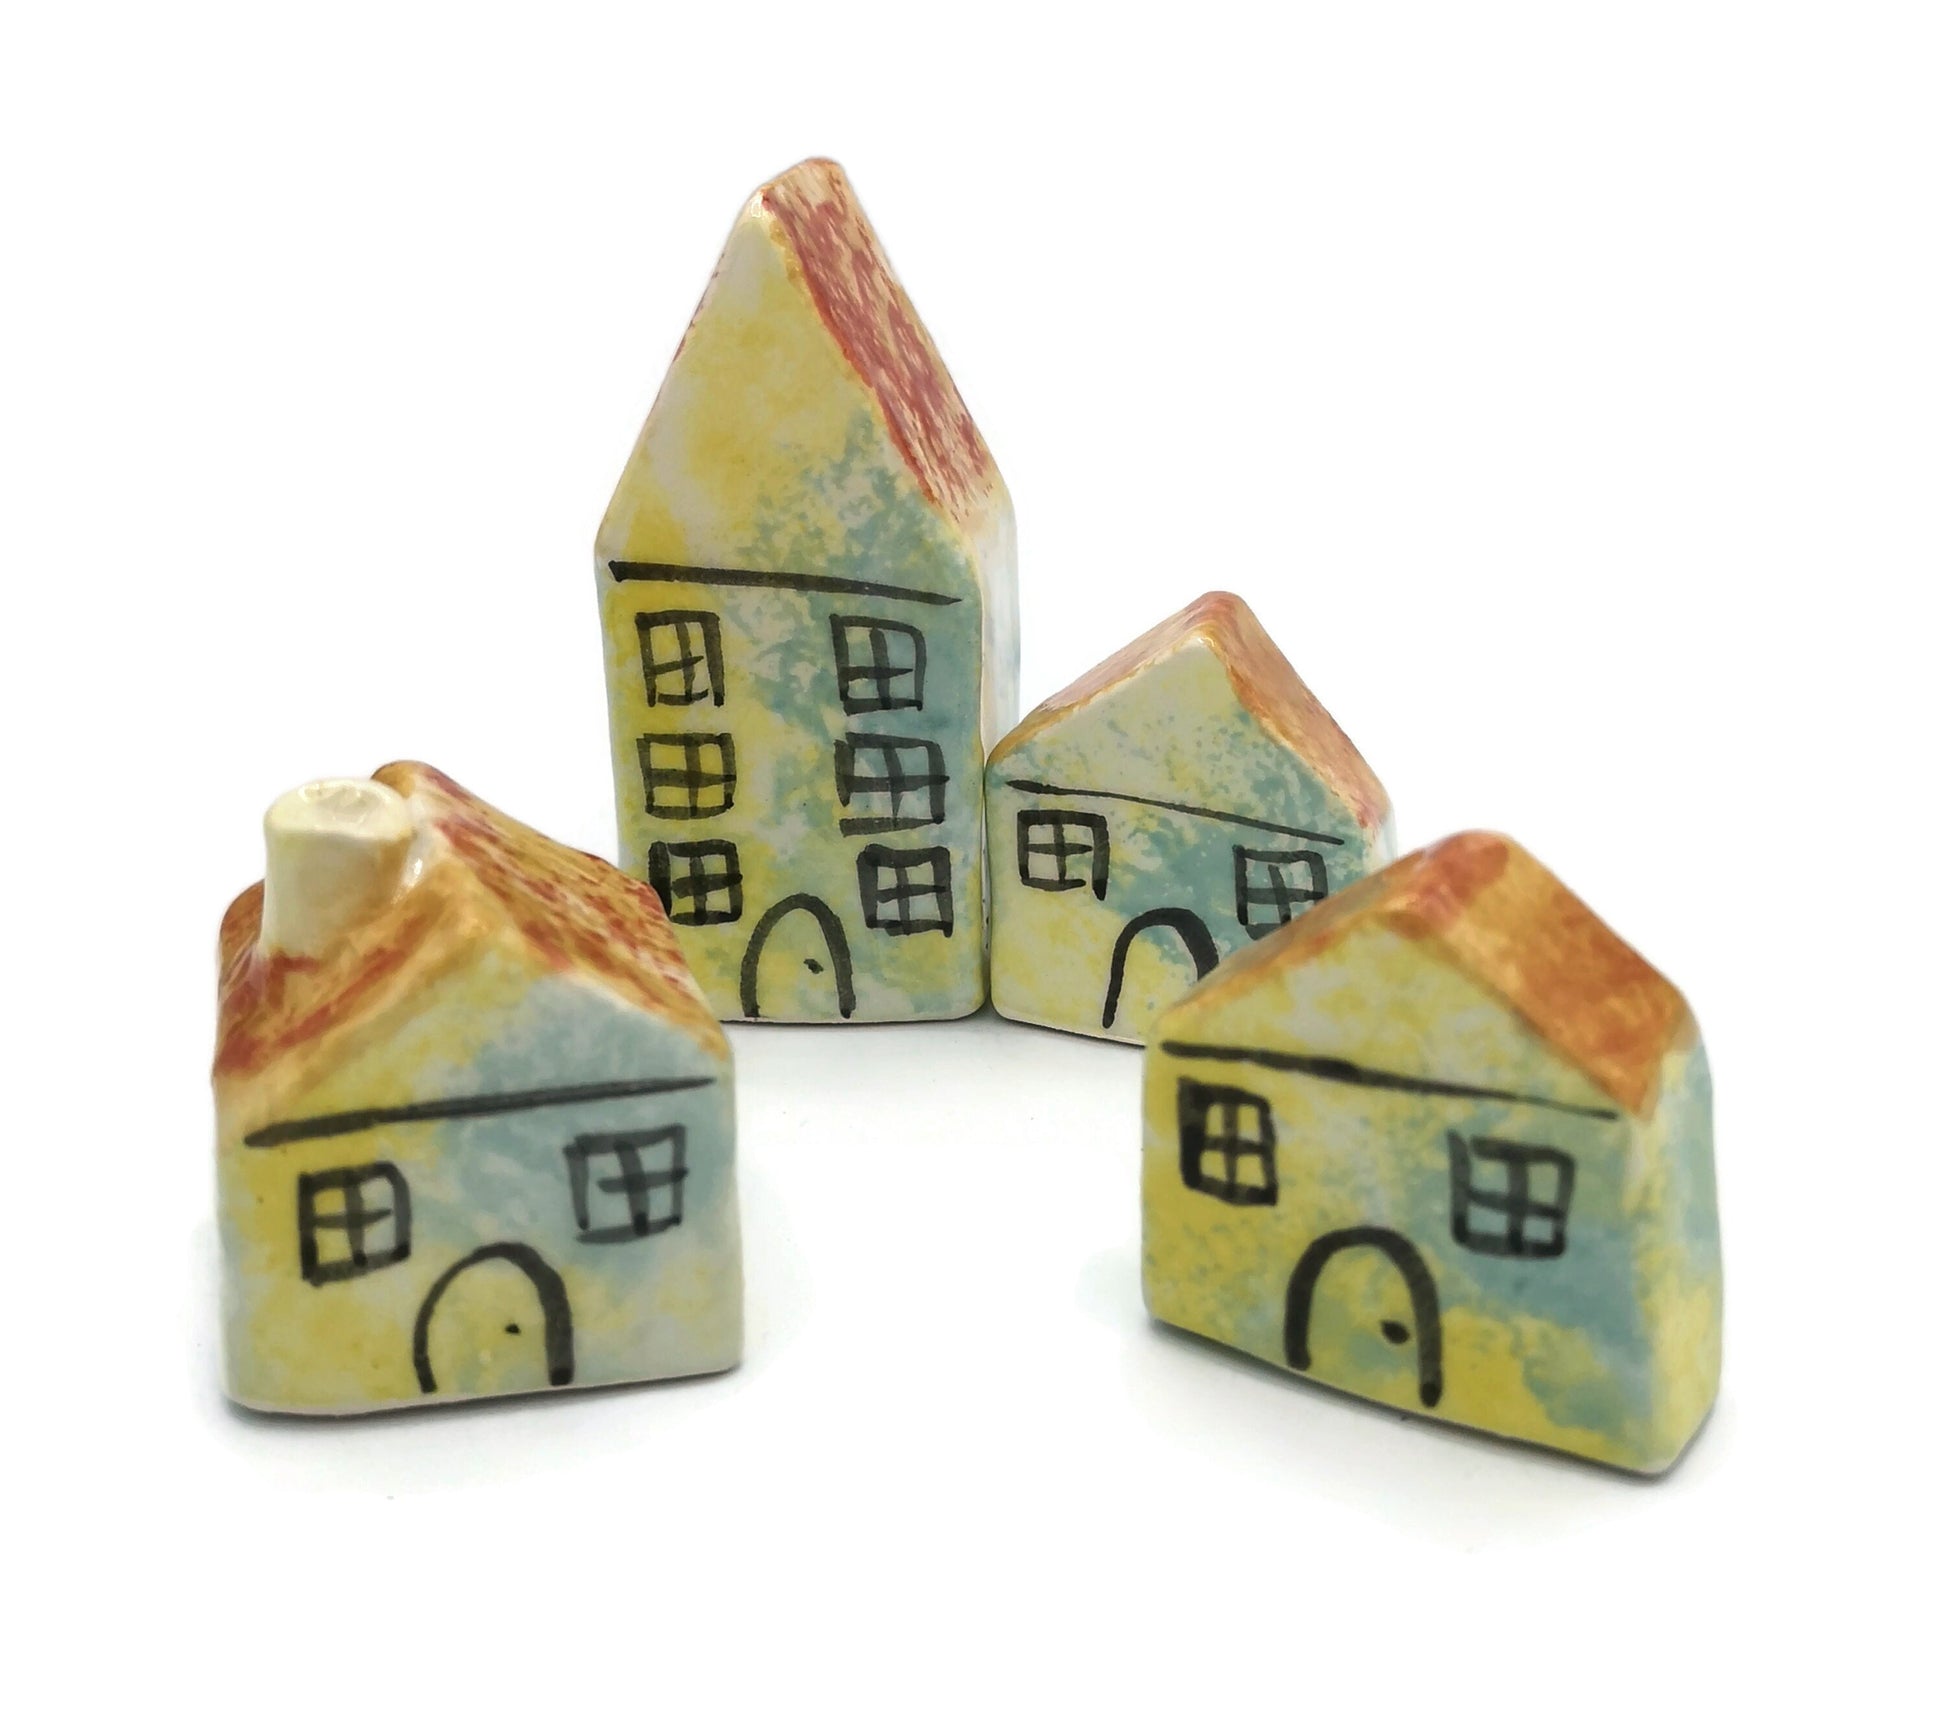 MINIATURE HOUSE, CLAY Sculpture, Set of 4 Ceramic Tiny House, Fathers Day Gift, Housewarming Gift First Home - Ceramica Ana Rafael